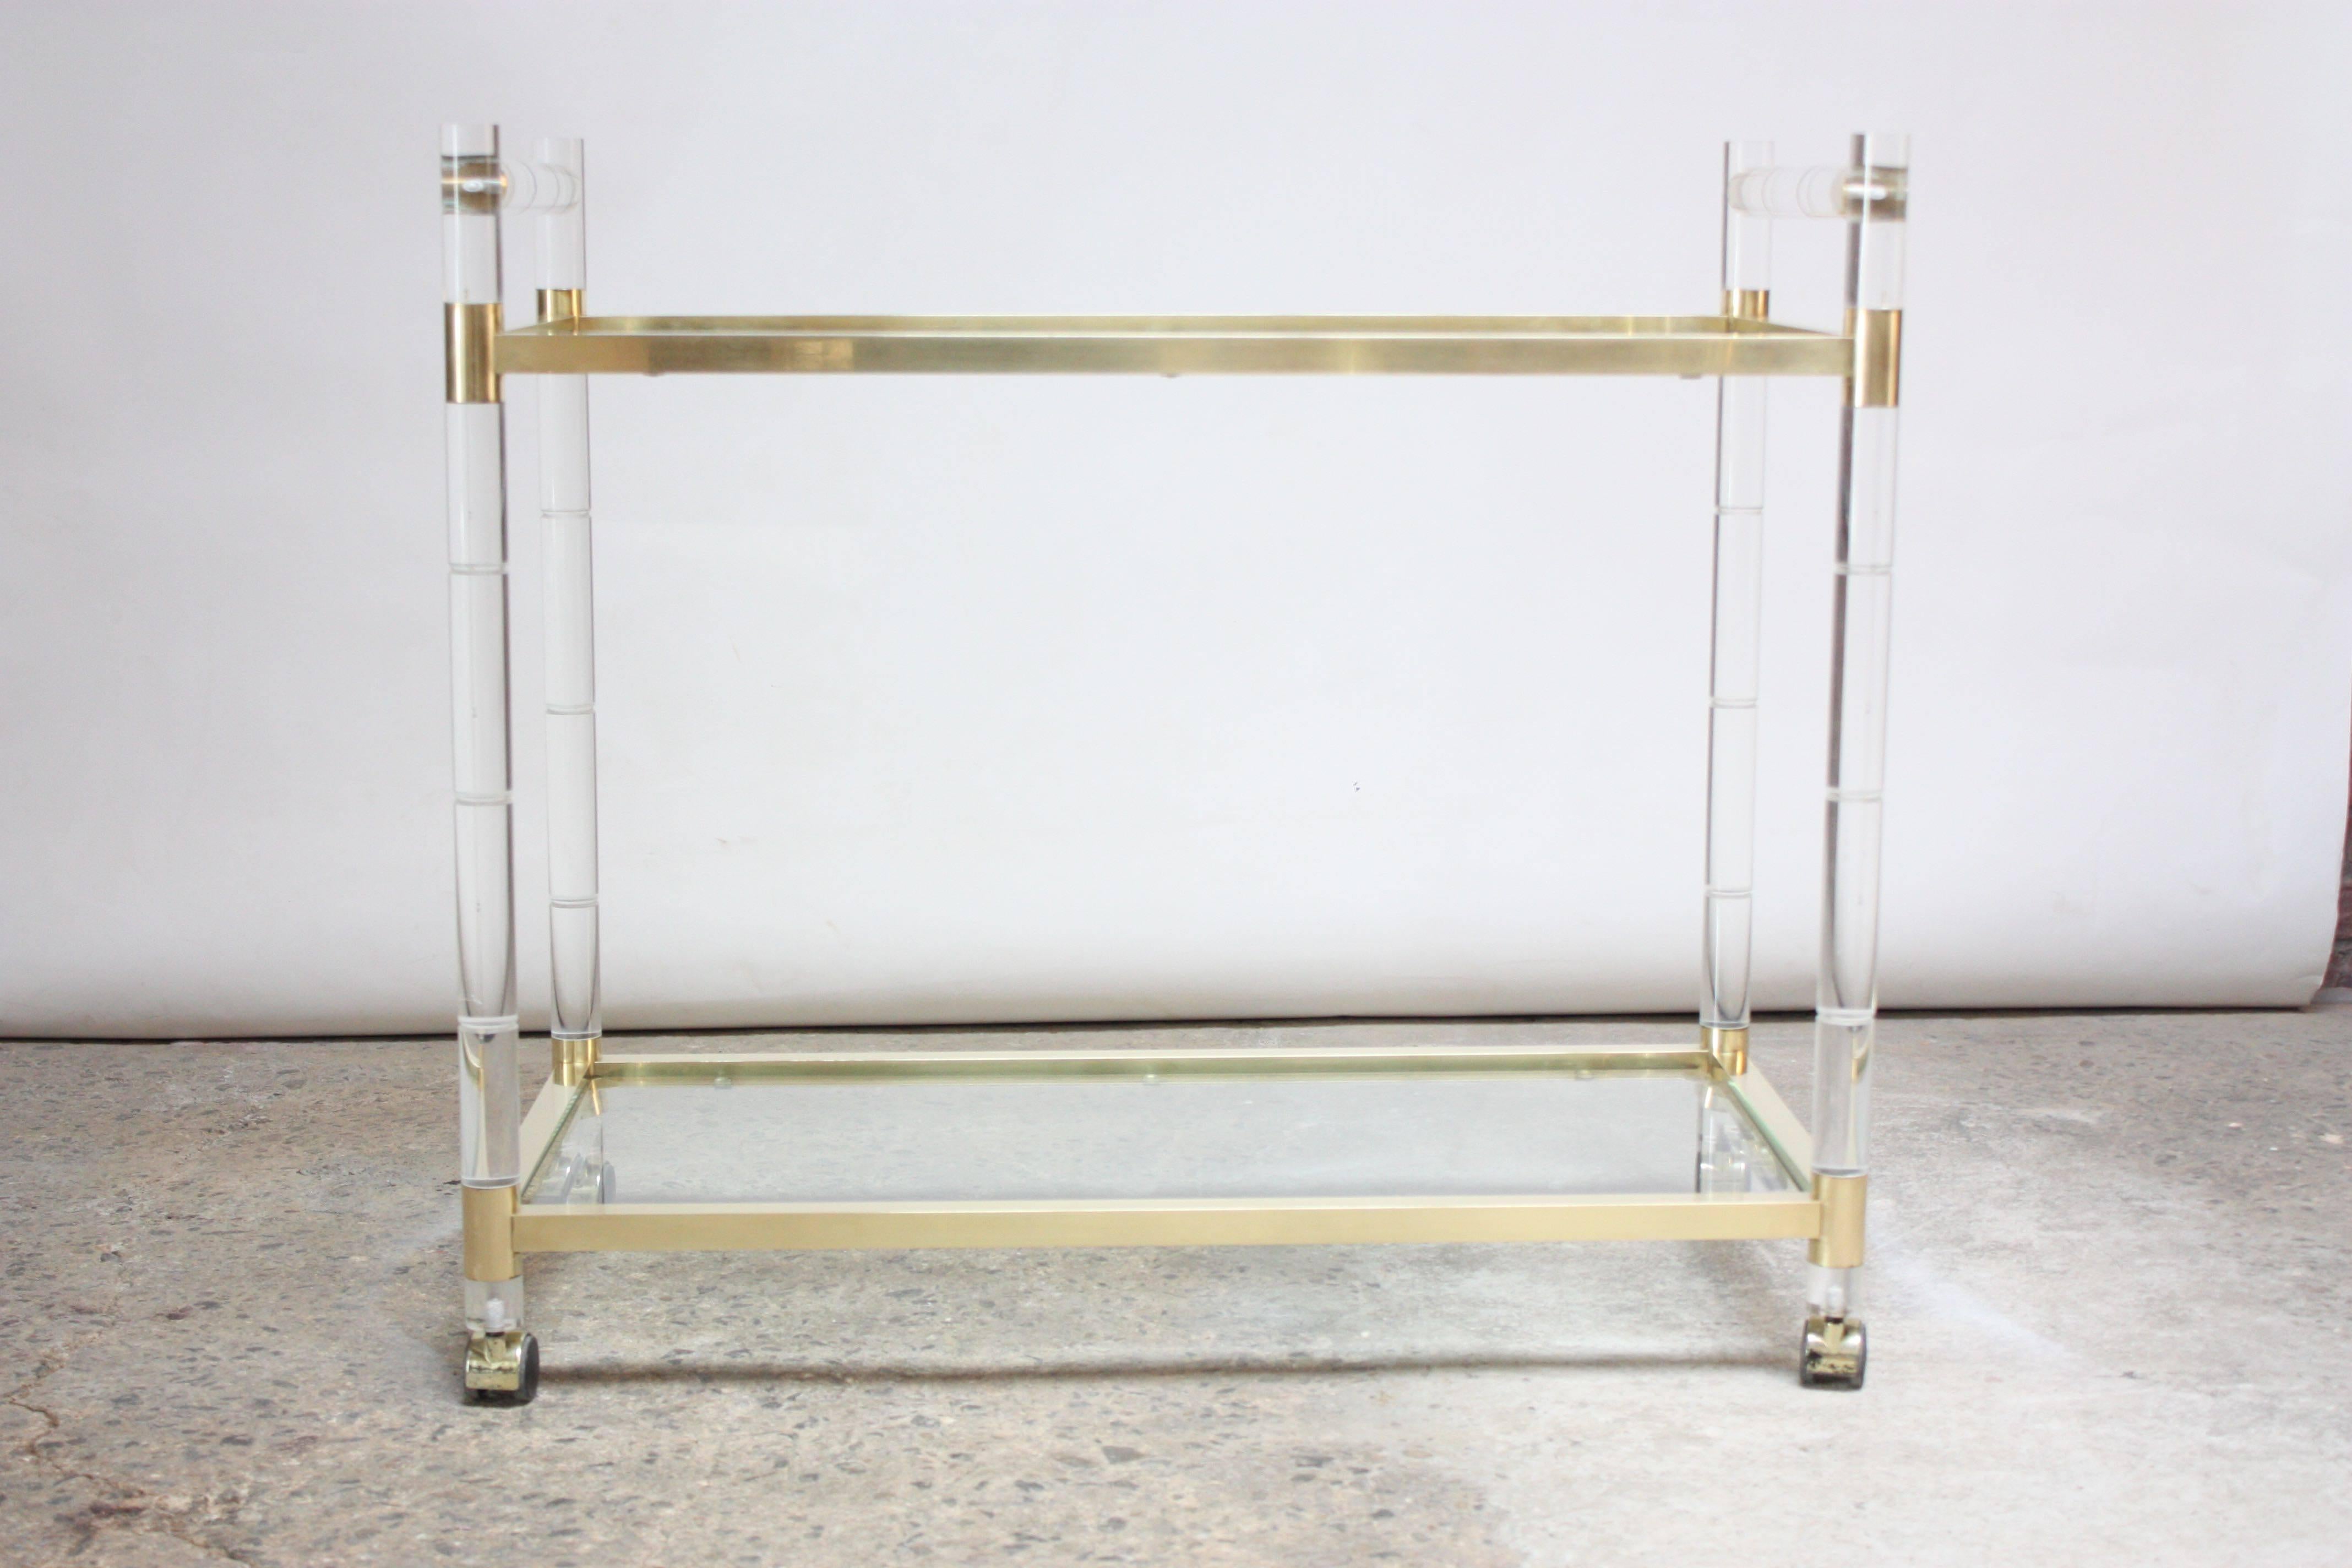 Two-tiered serving or bar cart designed in the 1960s by Charles Hollis Jones for his 'Regency Bamboo' line featuring a brass frame that has been hand-polished to a perfect, satin finish with faux-bamboo lucite rails. The beveled glass surfaces